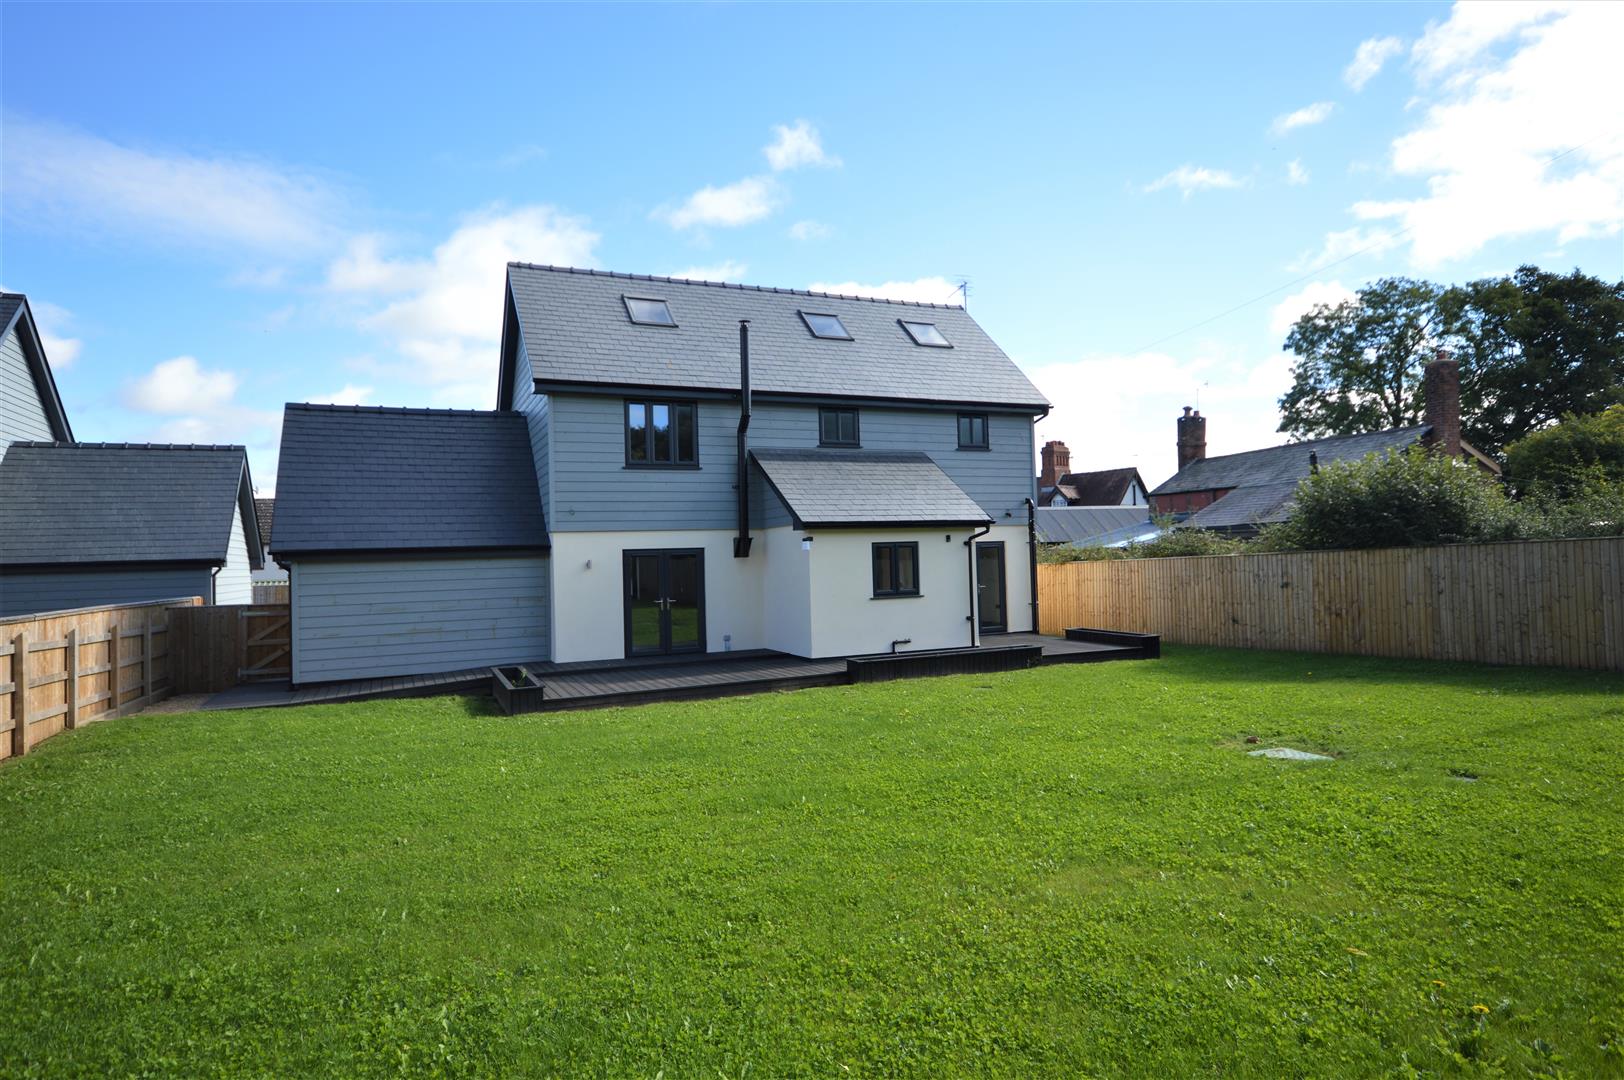 4 bed detached for sale in Brimfield 18